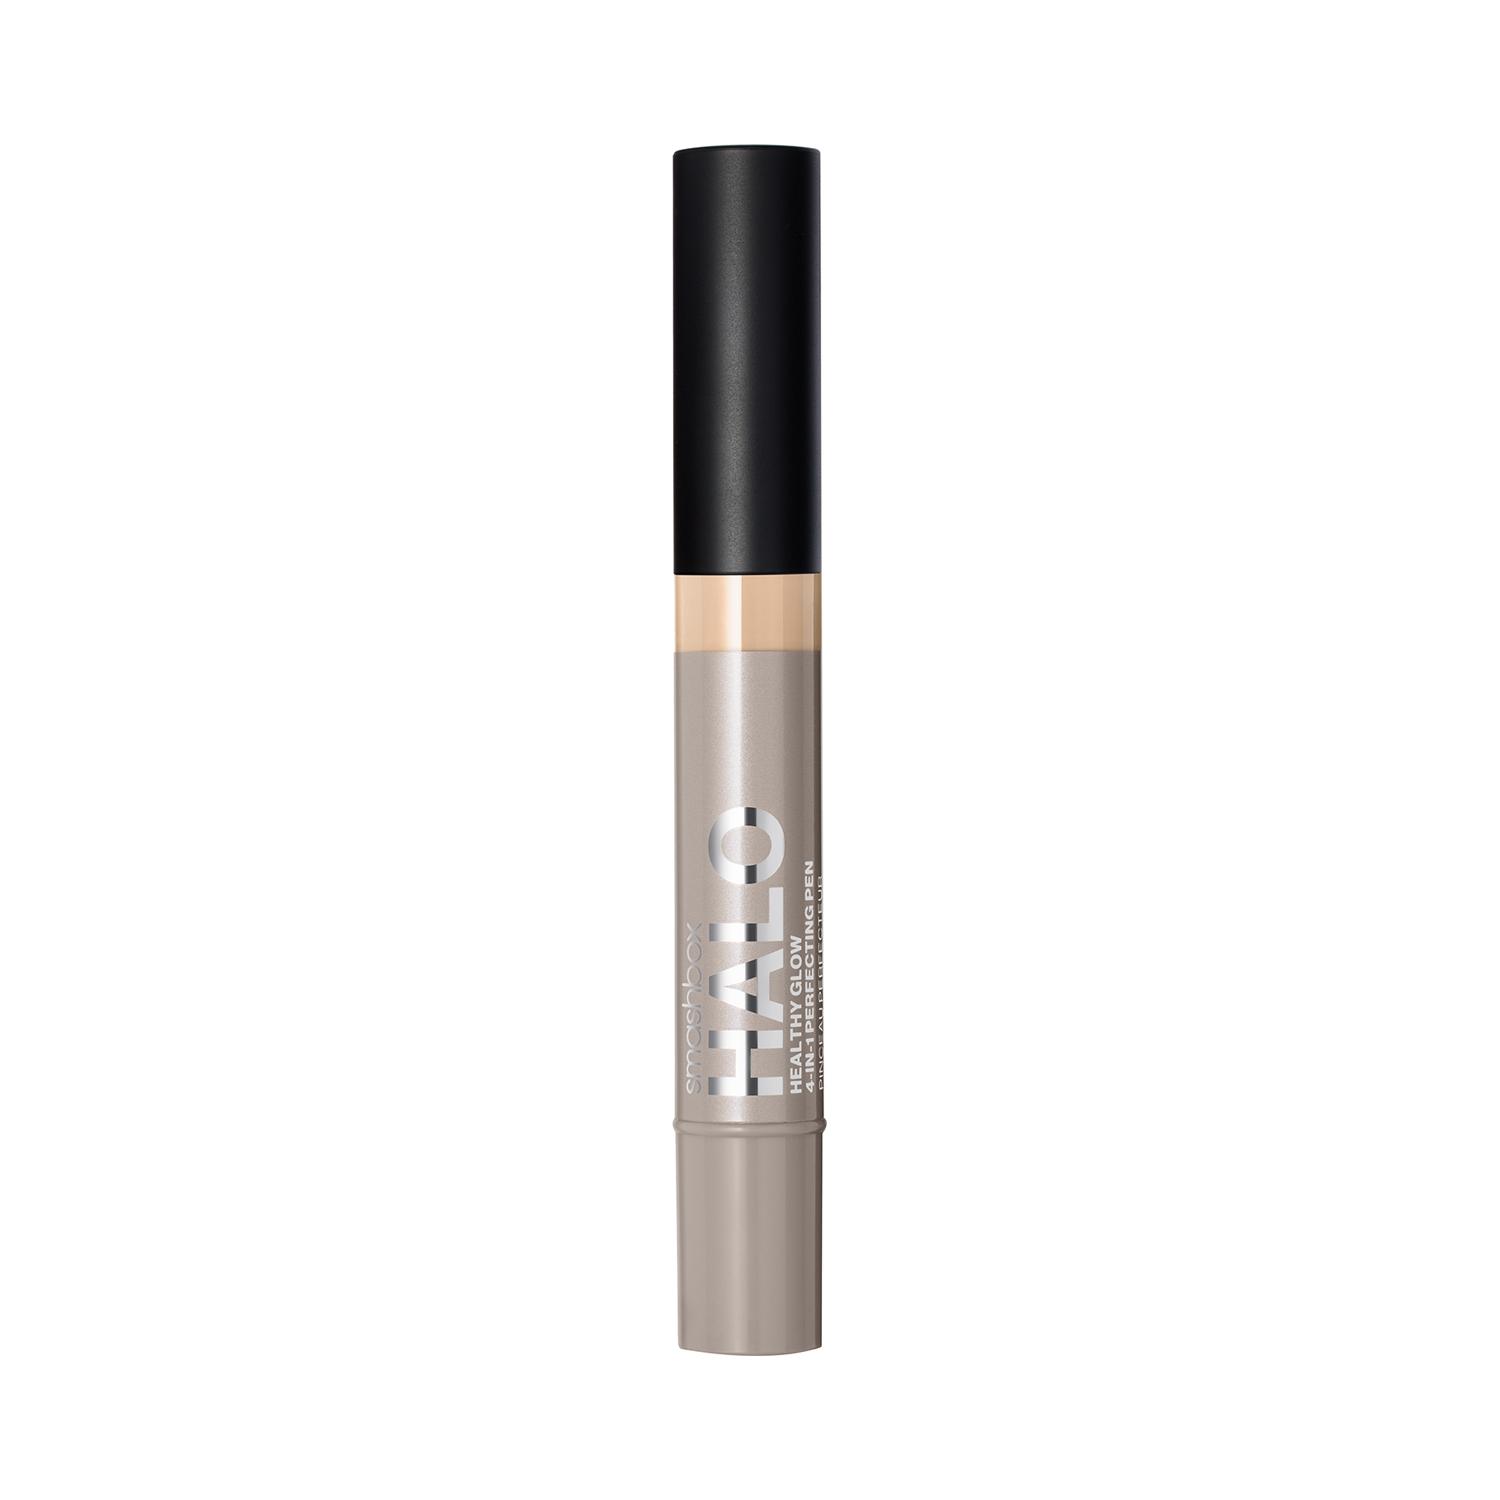 smashbox halo healthy glow 4-in-1 perfecting concealer pen - f30n (3.5ml)